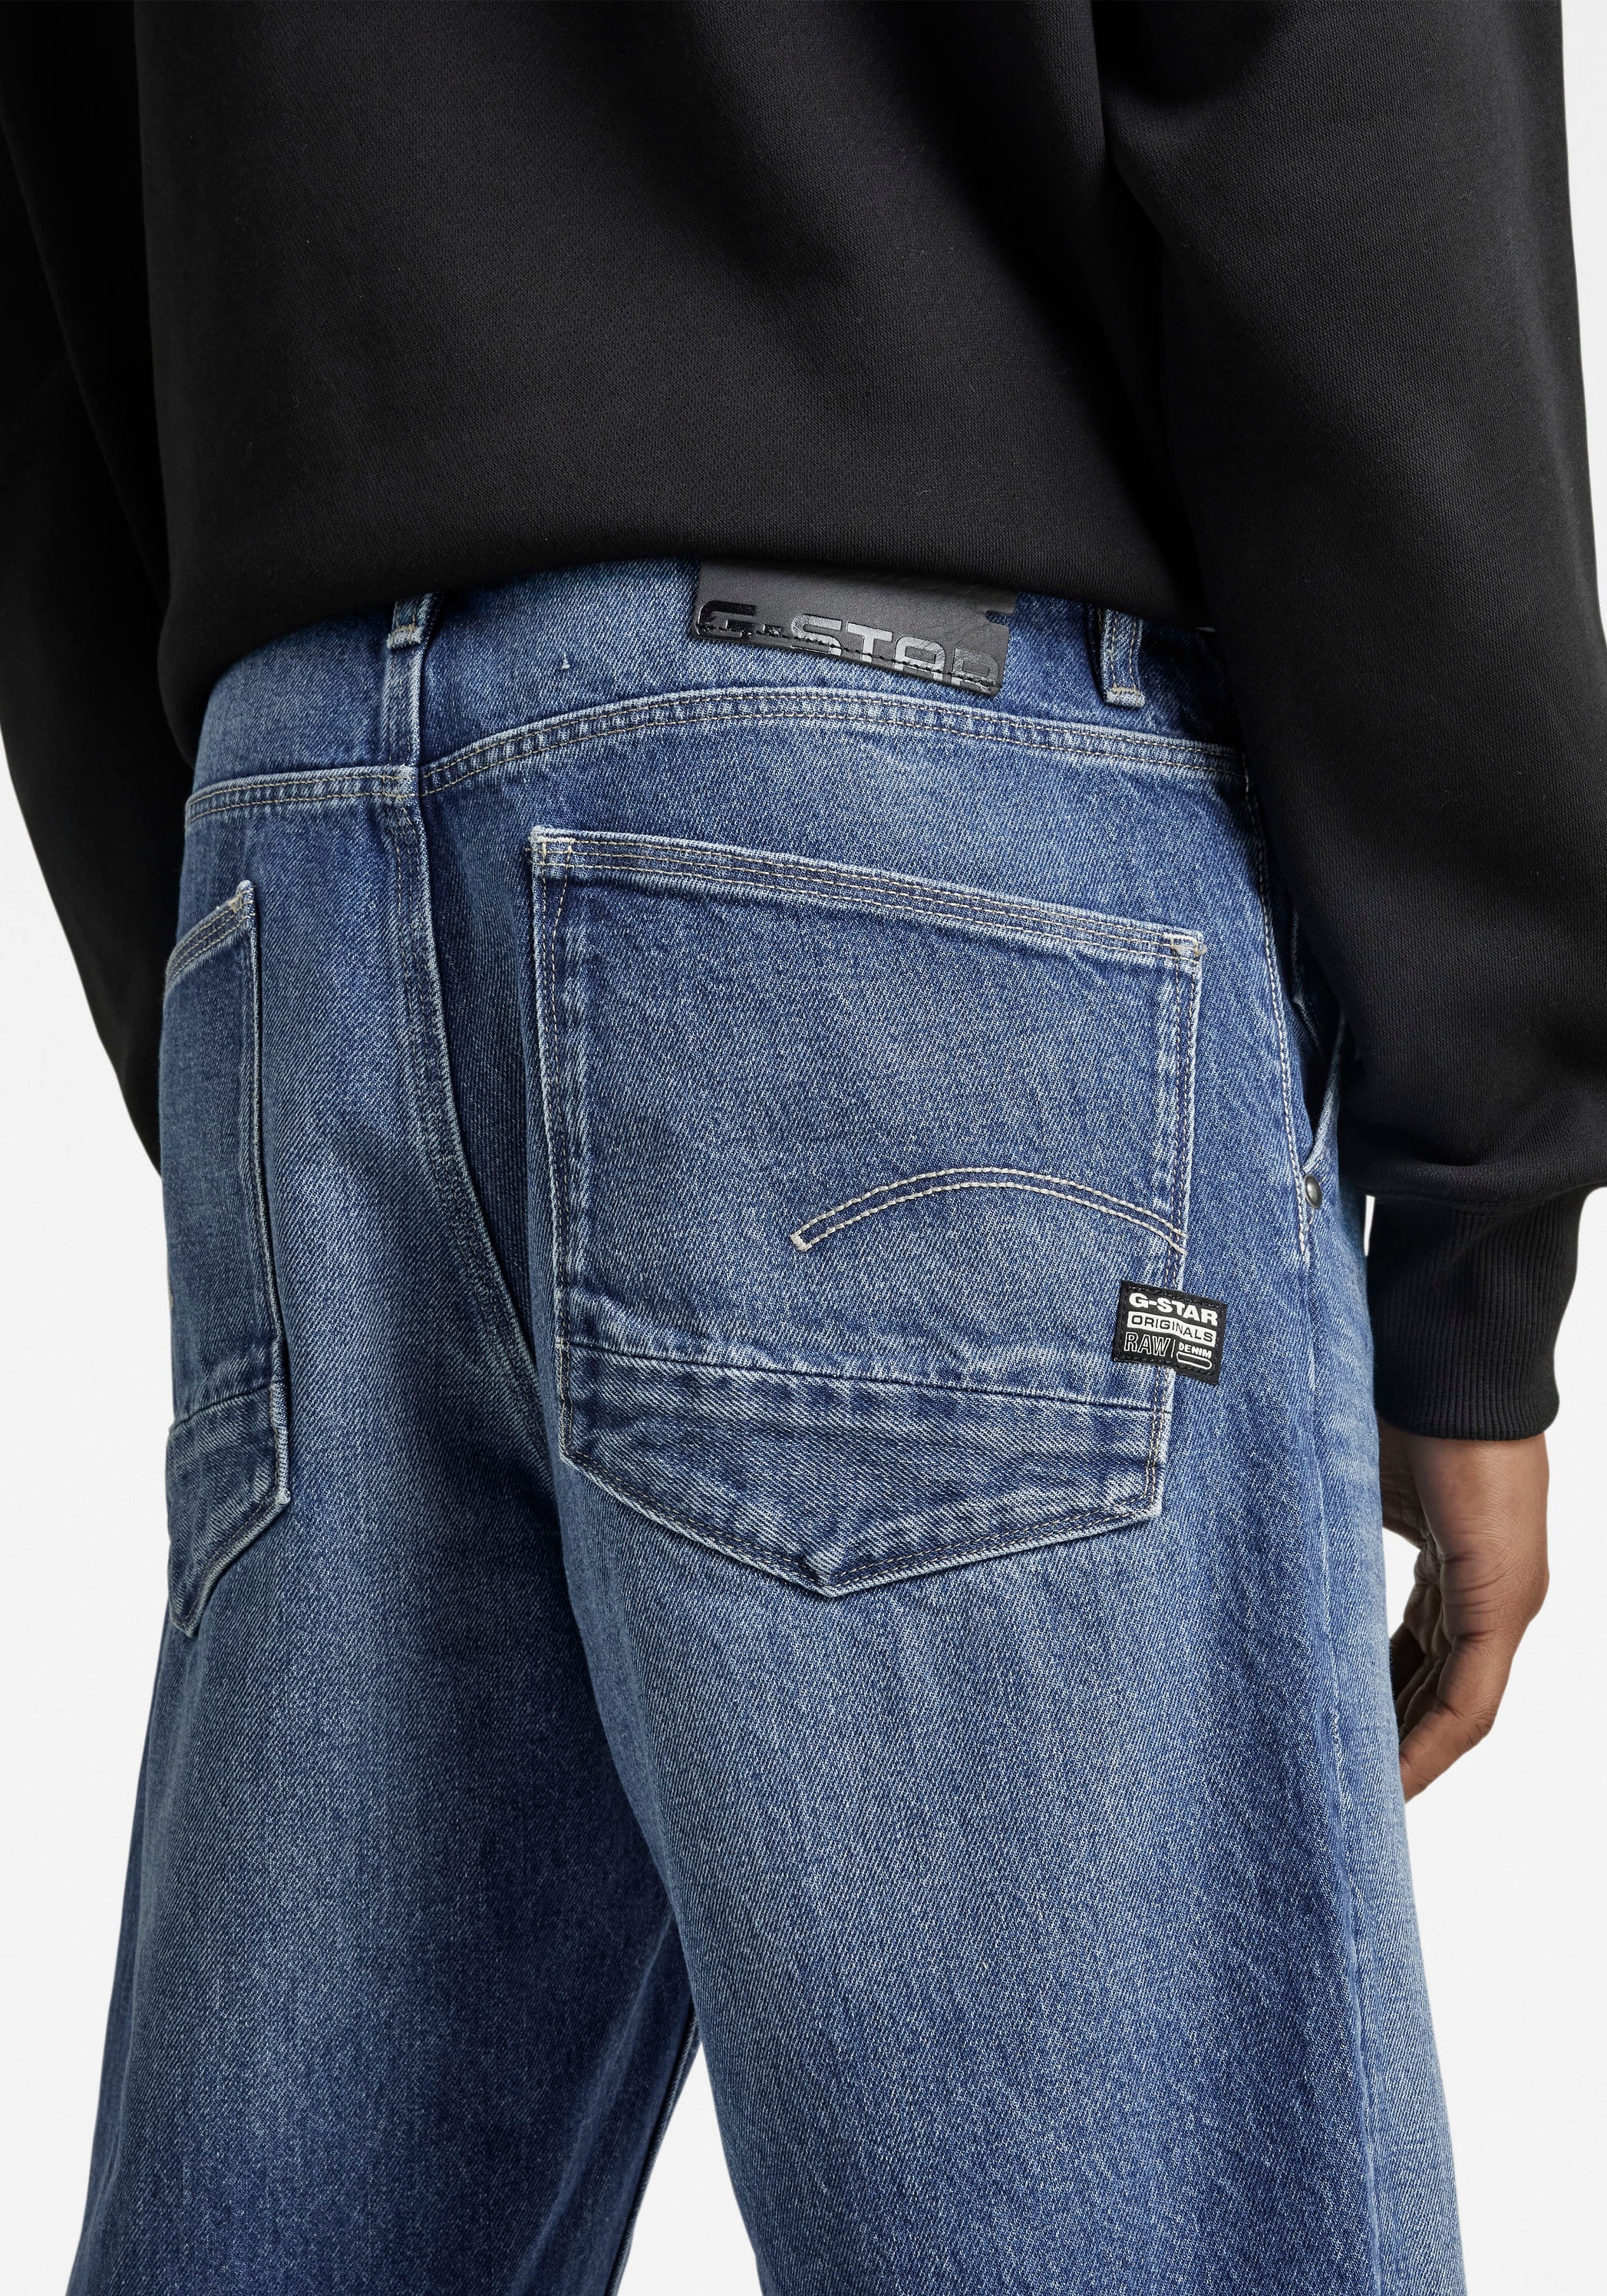 G-Star RAW Tapered-fit-Jeans »Relaxed Tapered bestellen | Grip ▷ 3d« BAUR